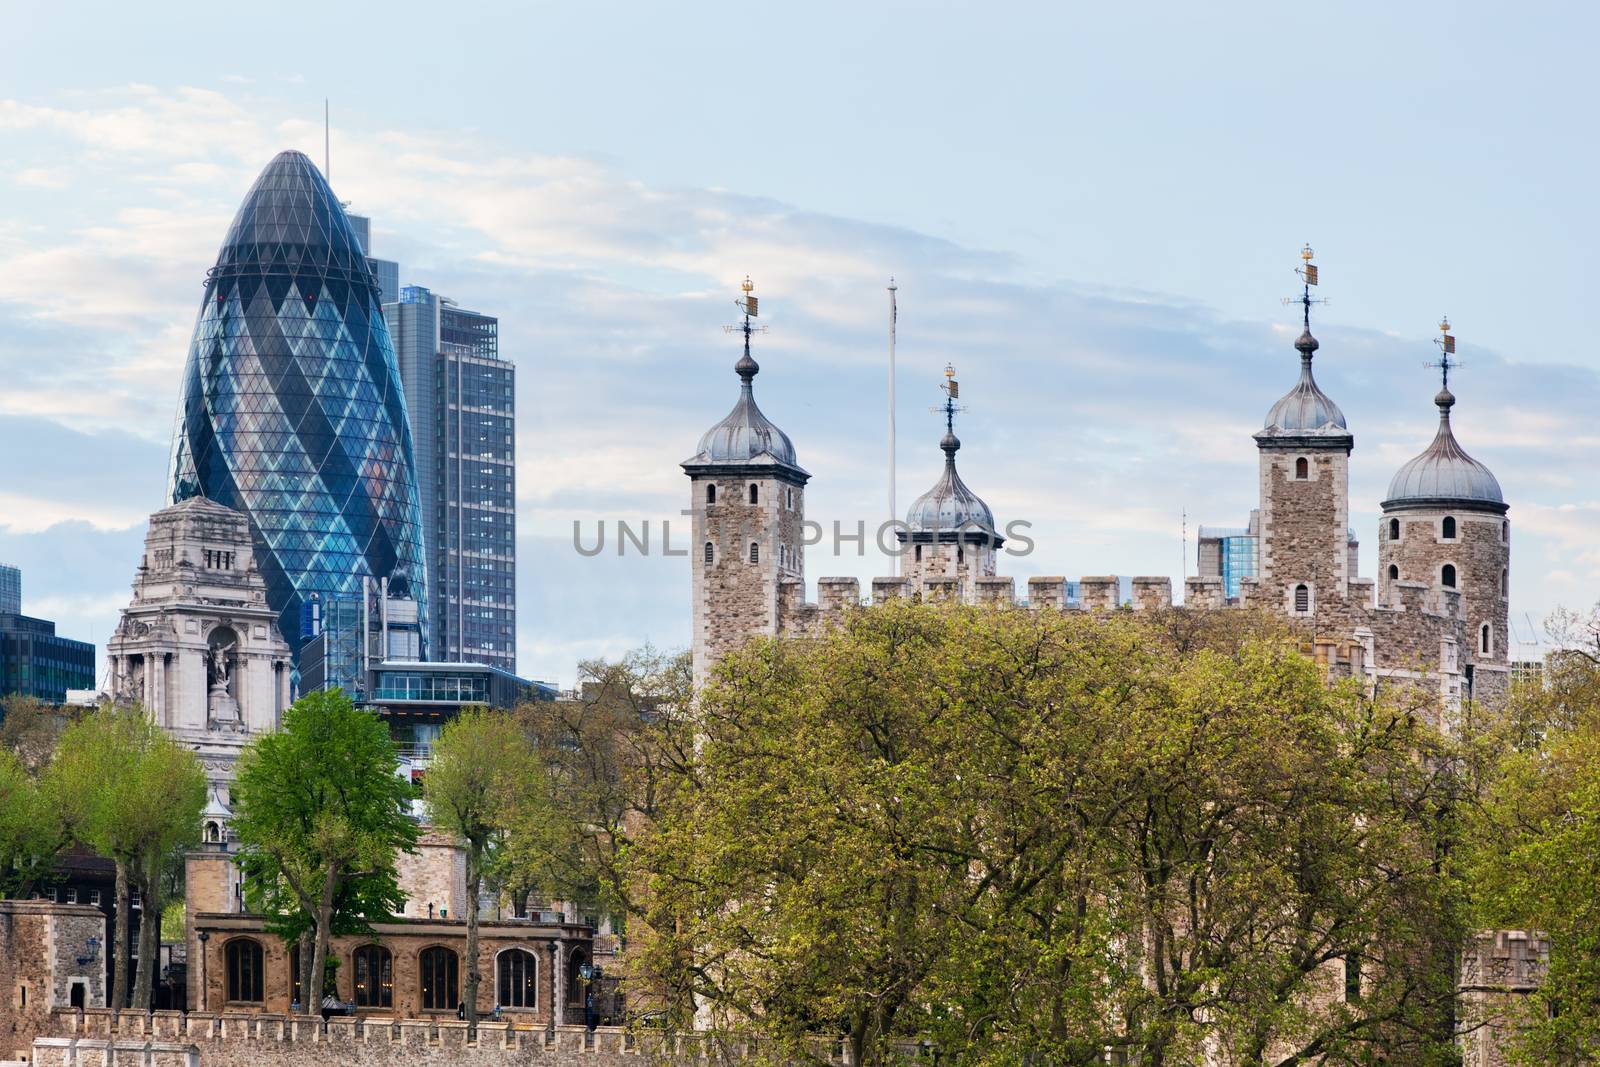 The Tower of London and the 30 St Mary Axe skyscraper. England, UK. by photocreo